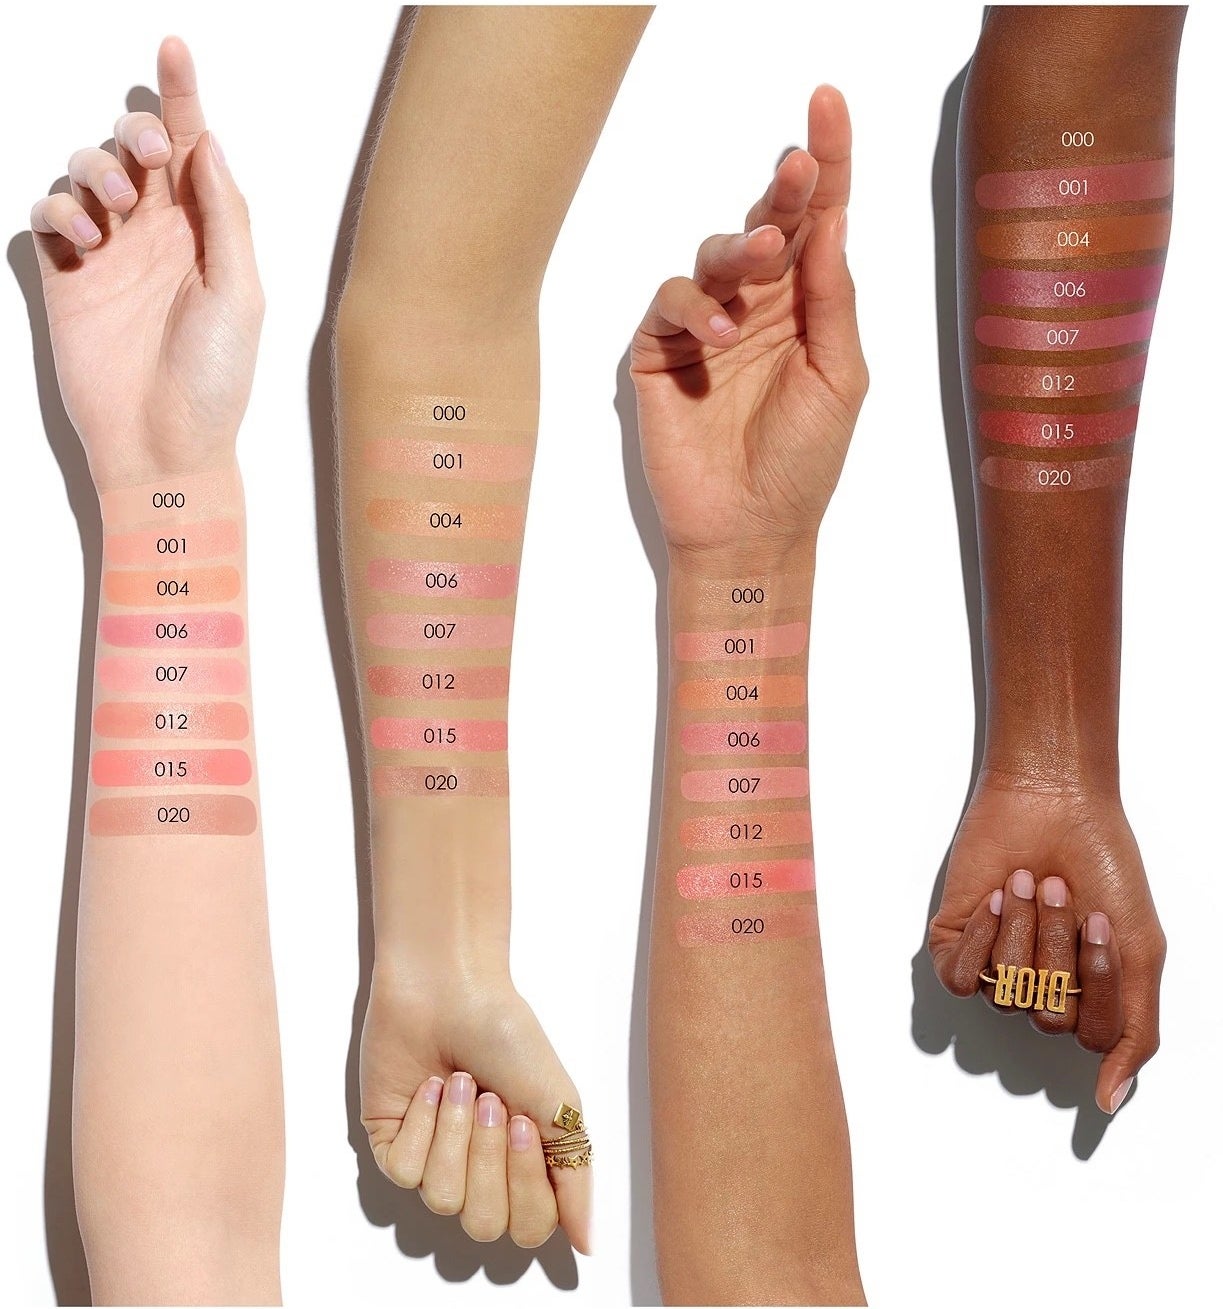 Models with swatches of lip balm on them